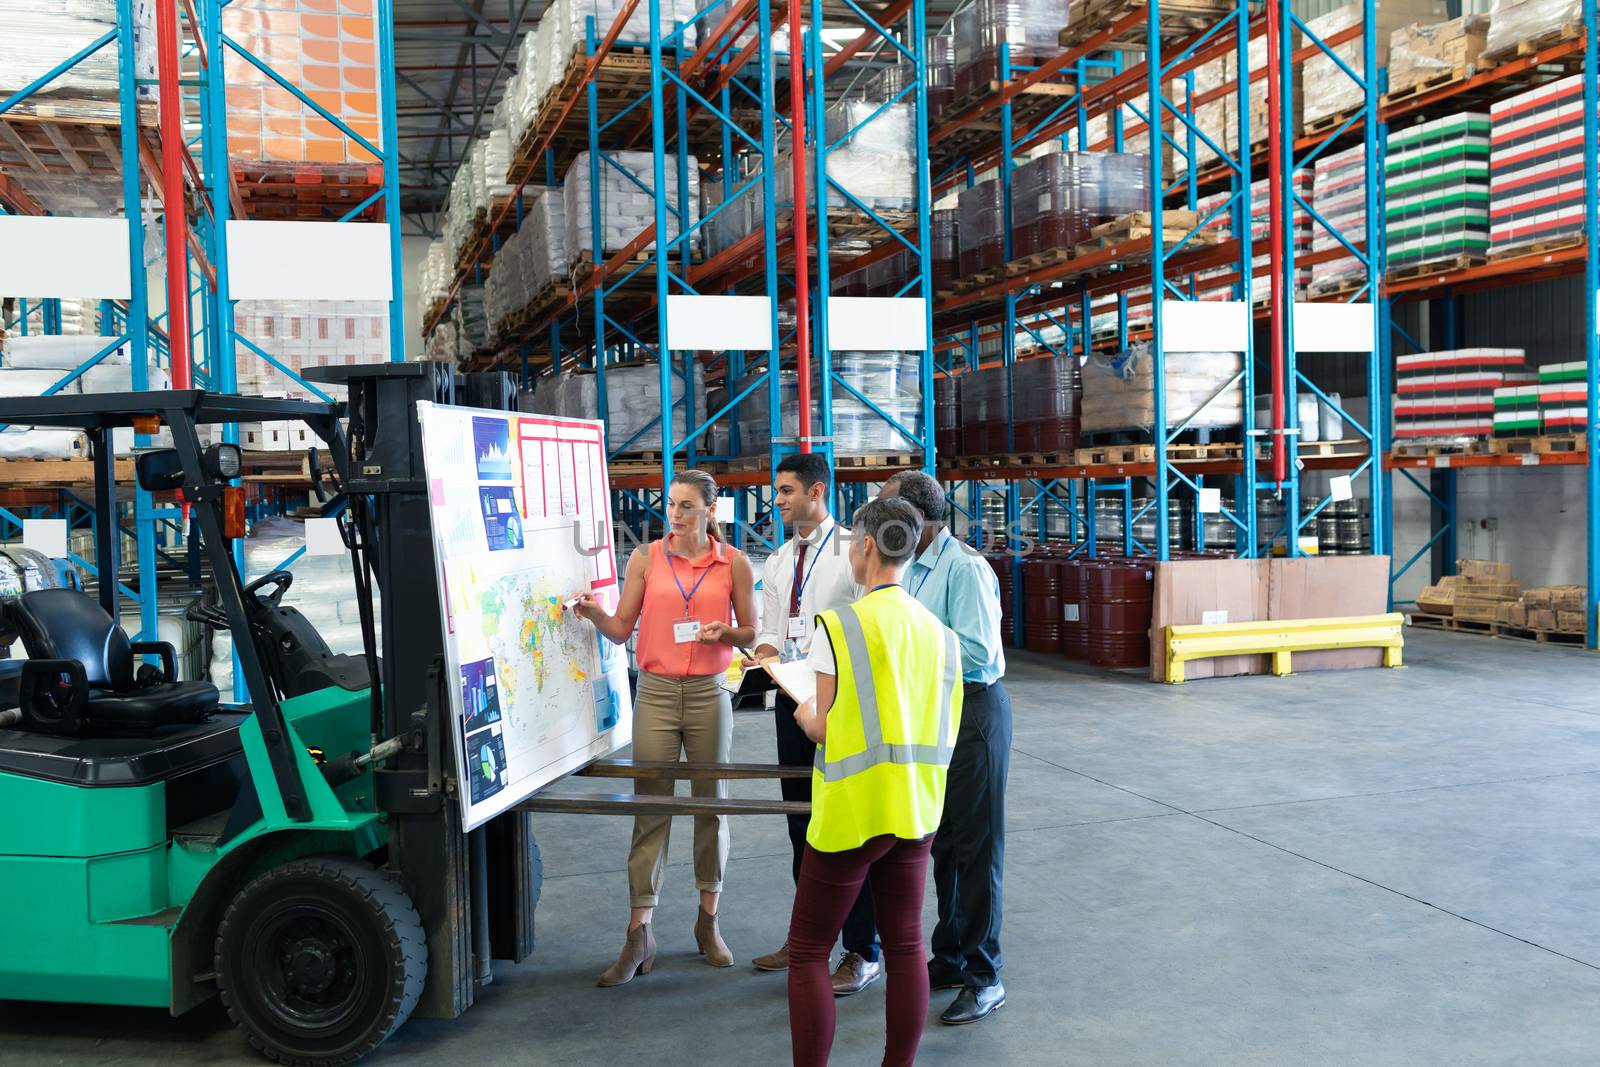 Front view of diverse warehouse staffs discussing over whiteboard in warehouse. This is a freight transportation and distribution warehouse. Industrial and industrial workers concept